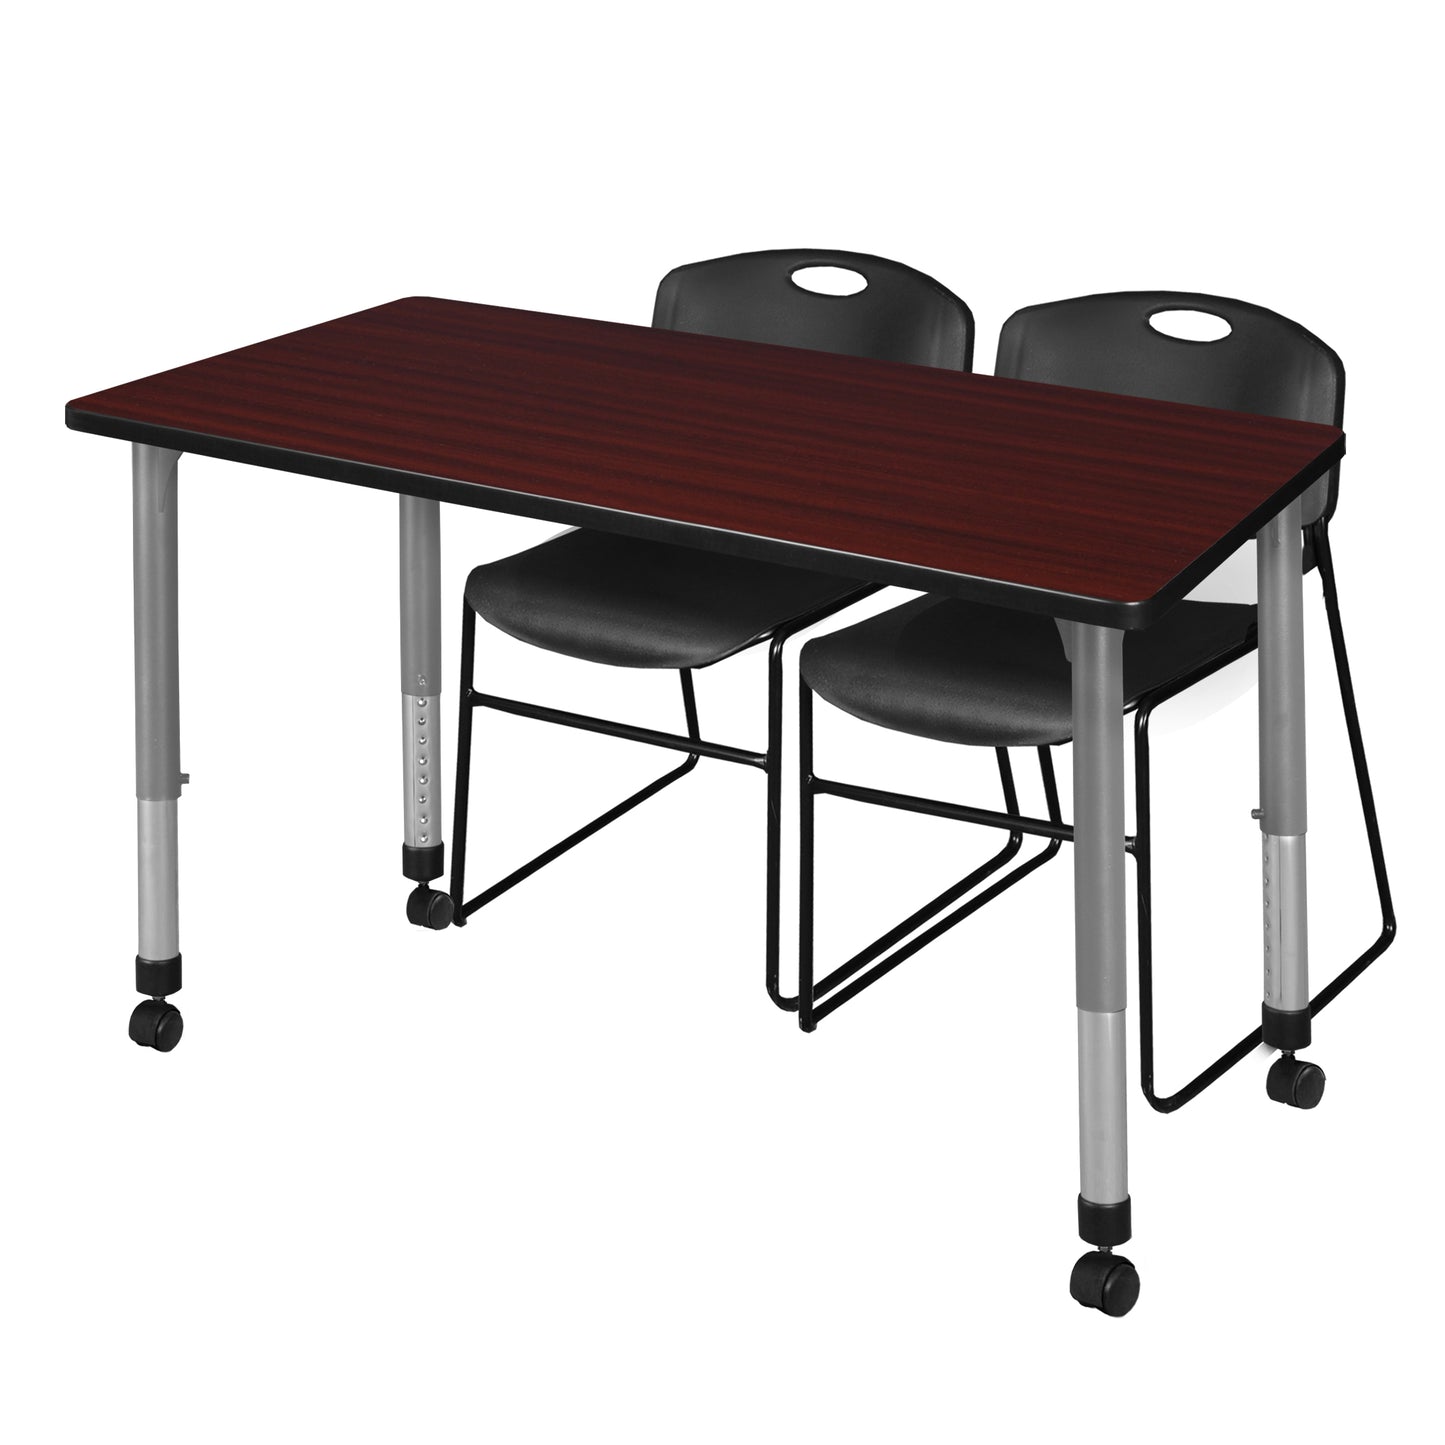 Regency Kee 48 x 30 in. Adjustable Classroom Table & 2 Zeng Stack Chairs